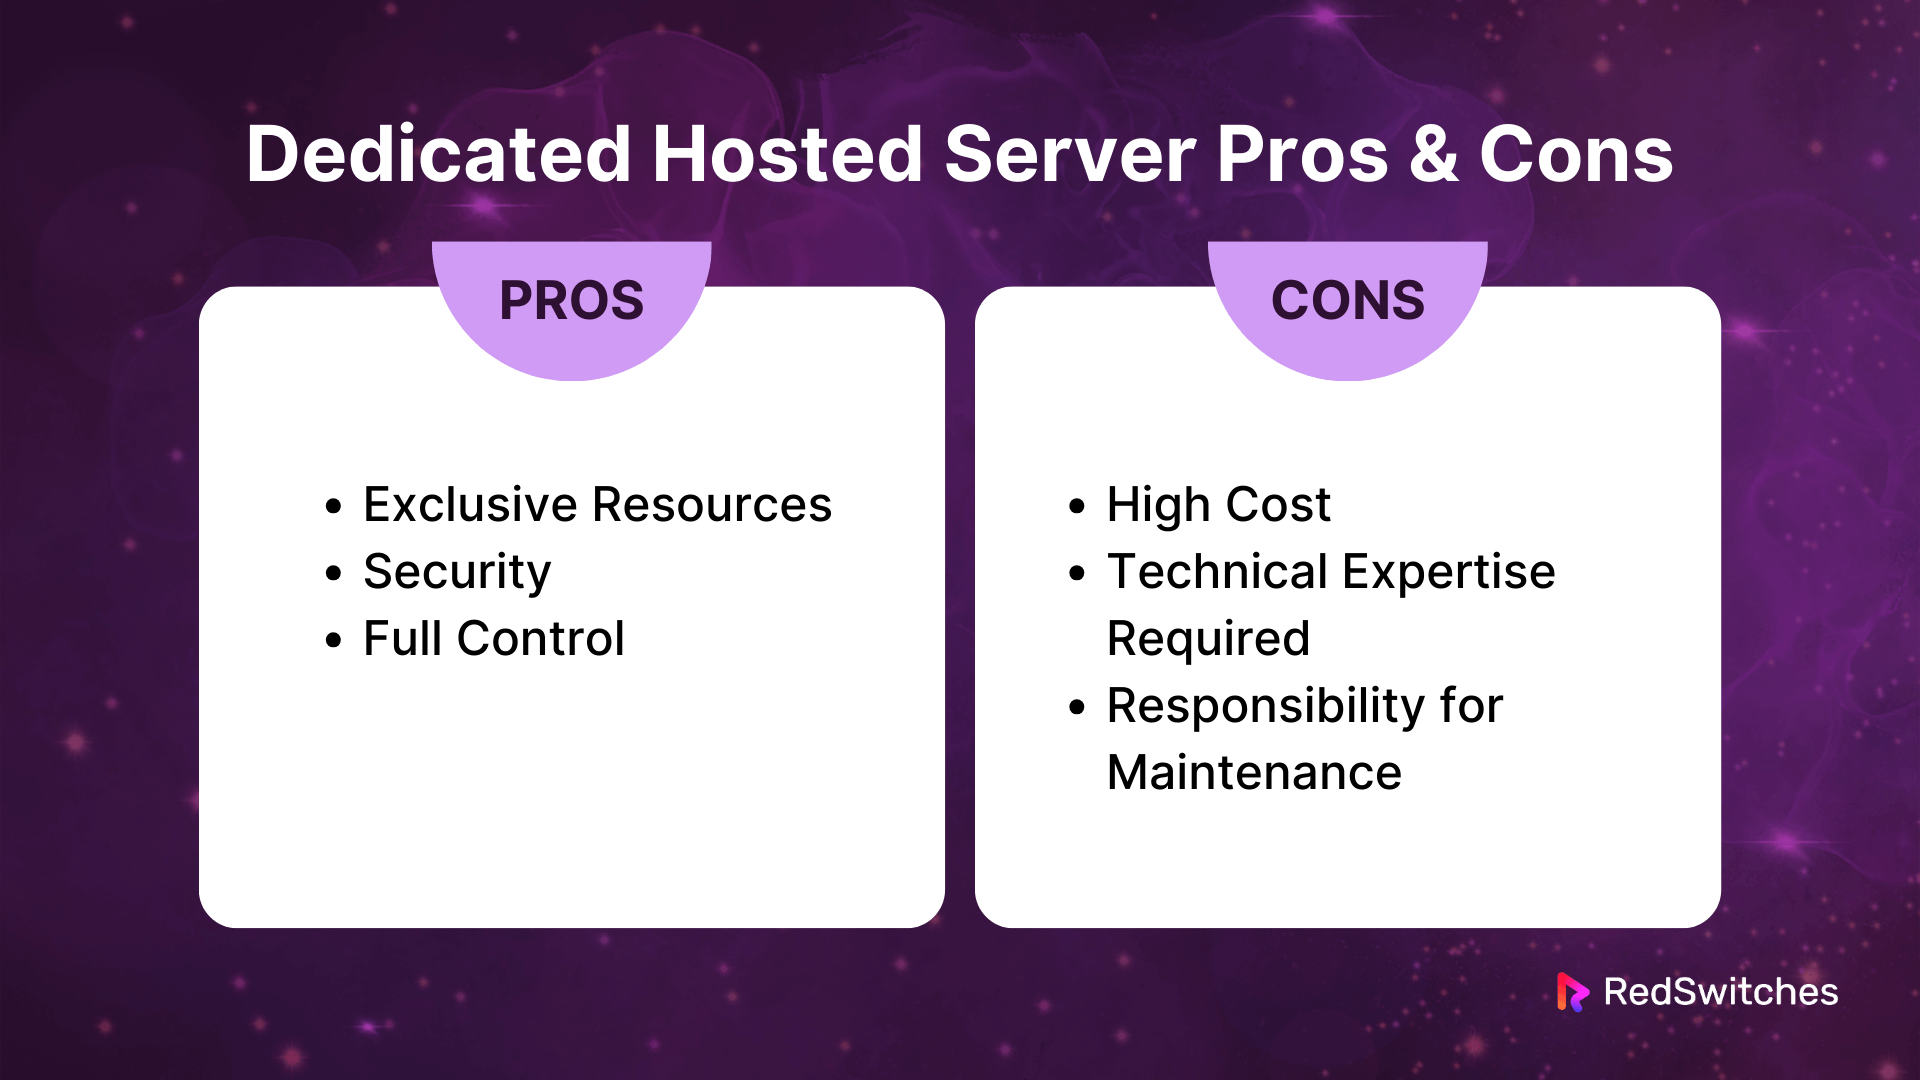 Dedicated Hosted Server Pros and Cons